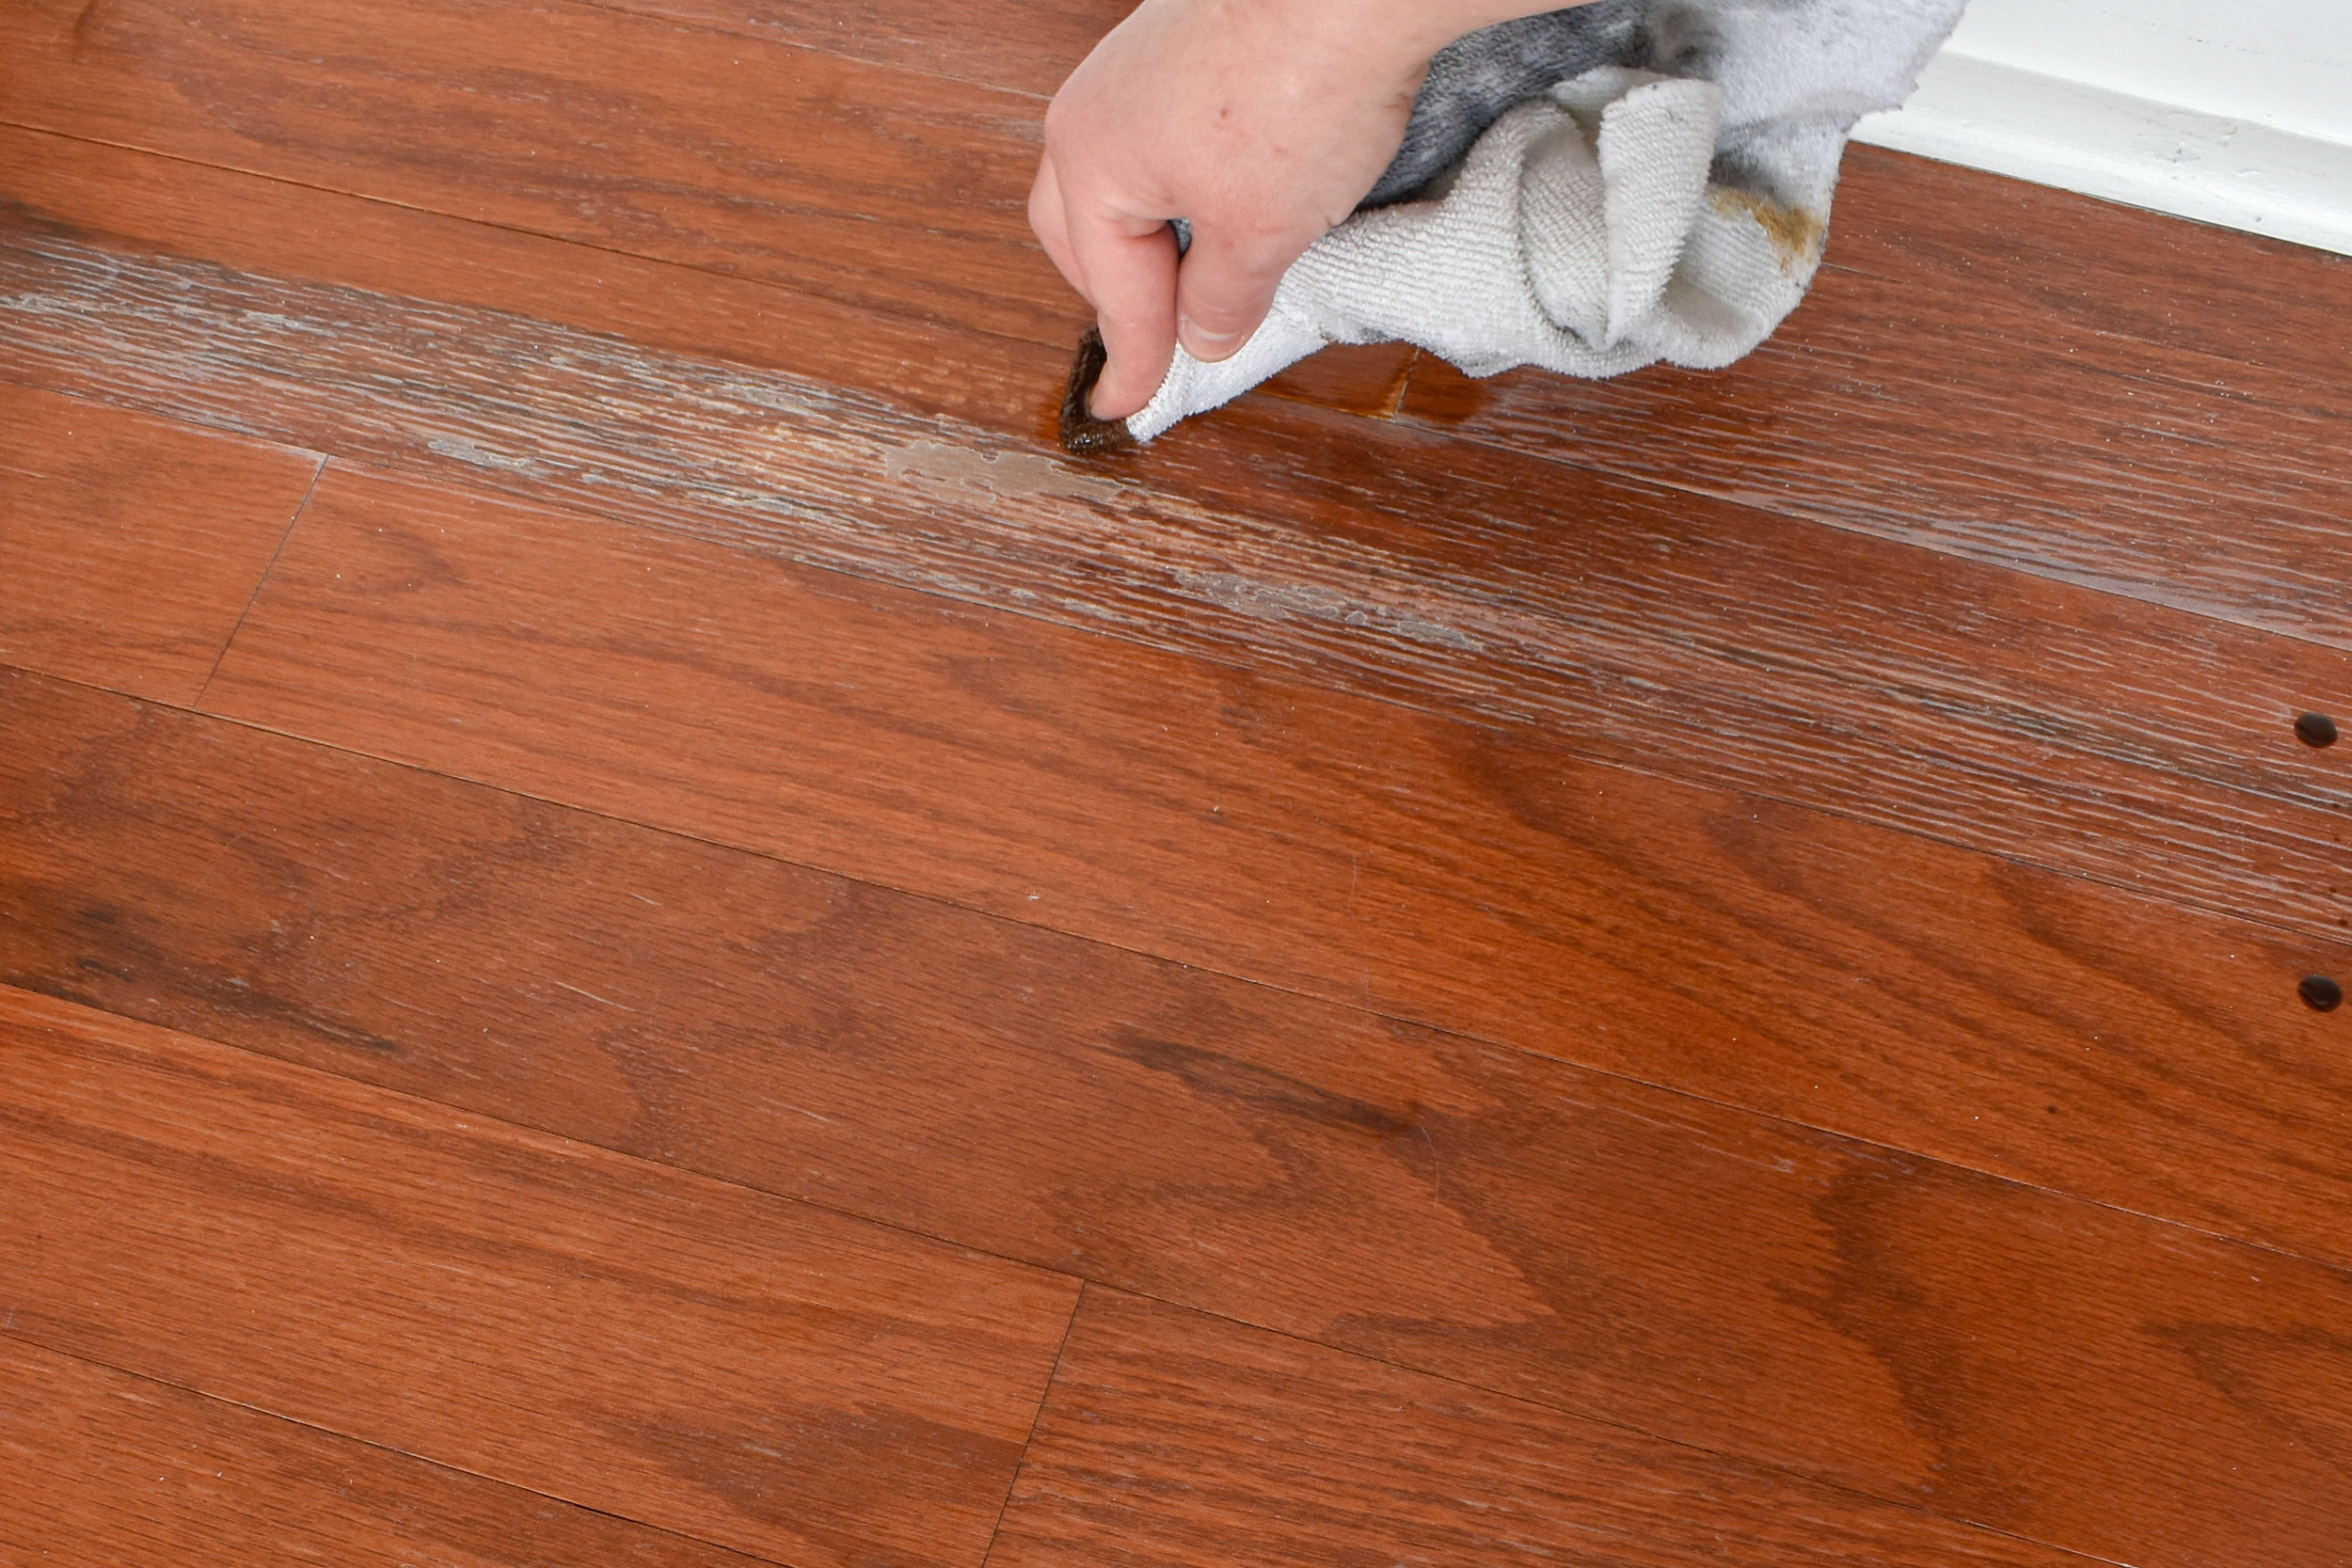 How To Make Old Hardwood Floors Shine, How Can I Make My Old Hardwood Floors Shine